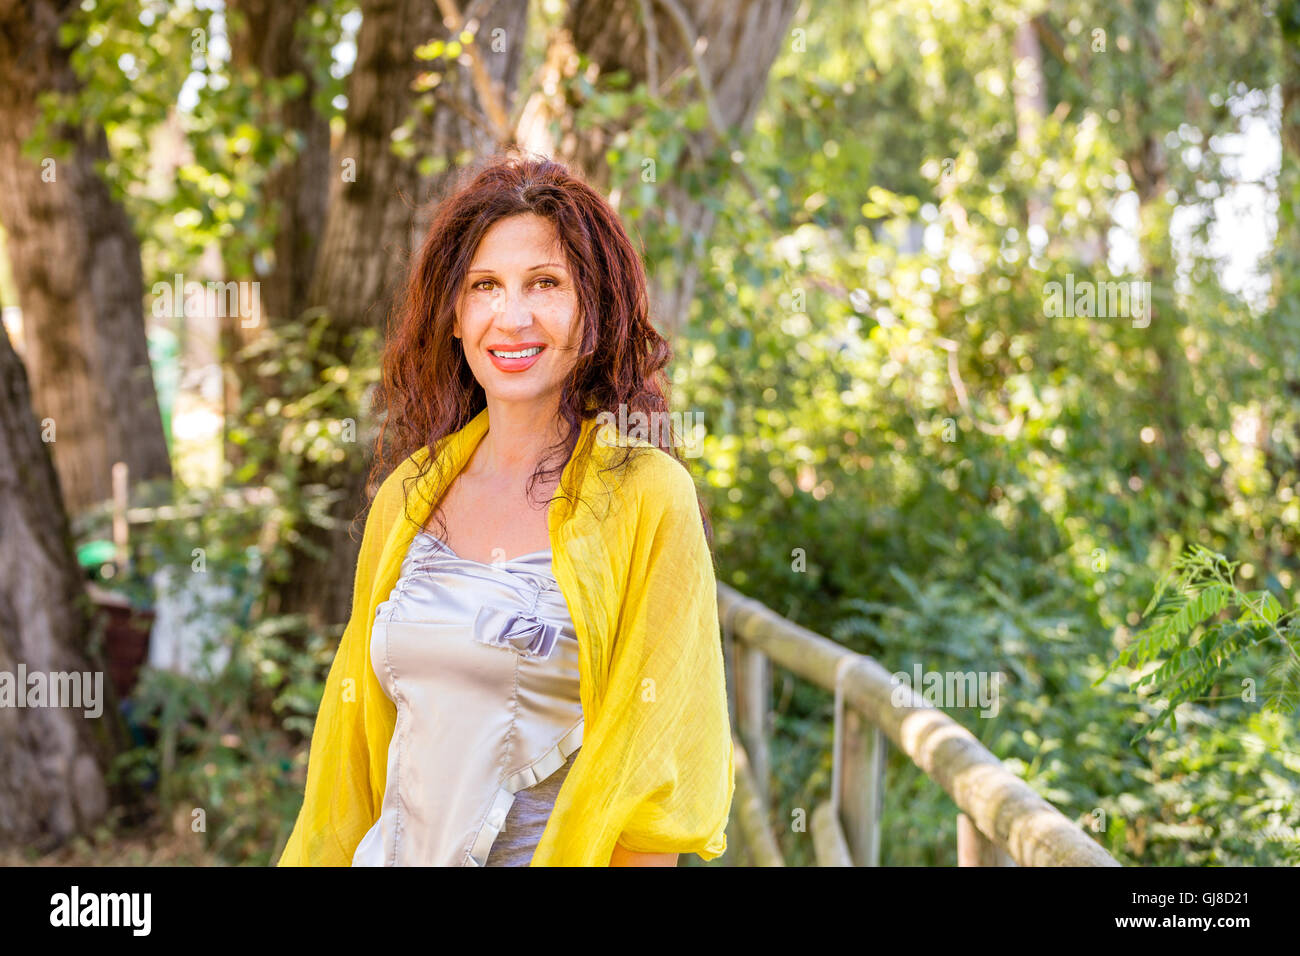 elegant and glamorous mature woman with yellow shawl and silver top is smiling in a green park Stock Photo